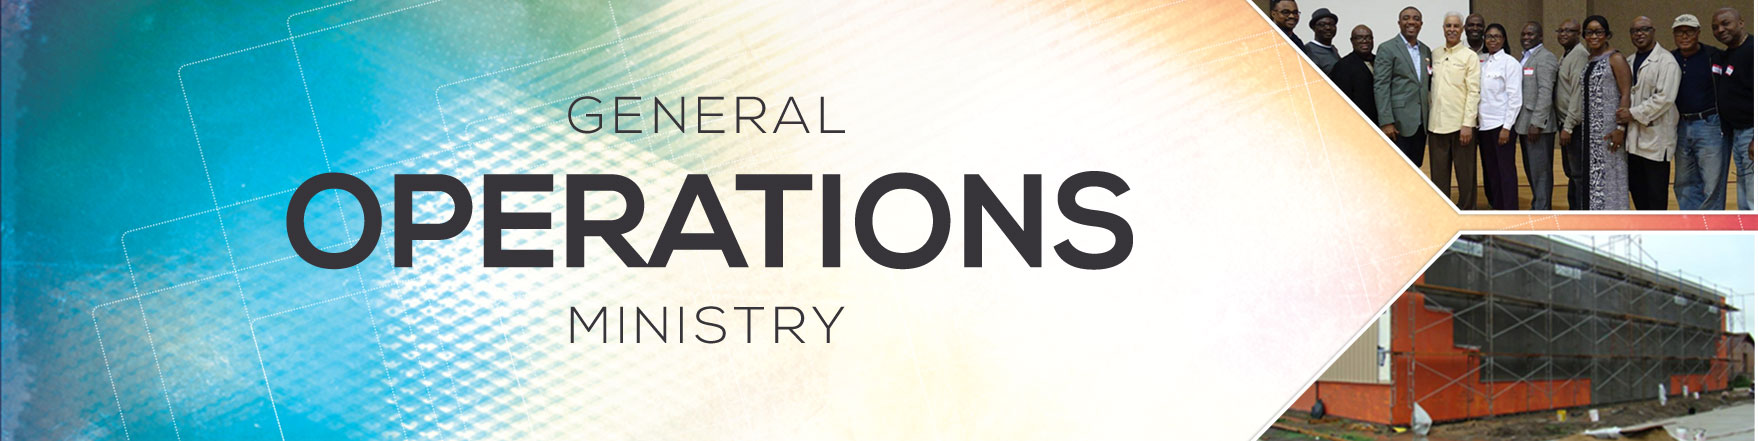 UCF-Operations-Ministry-Banner.jpg